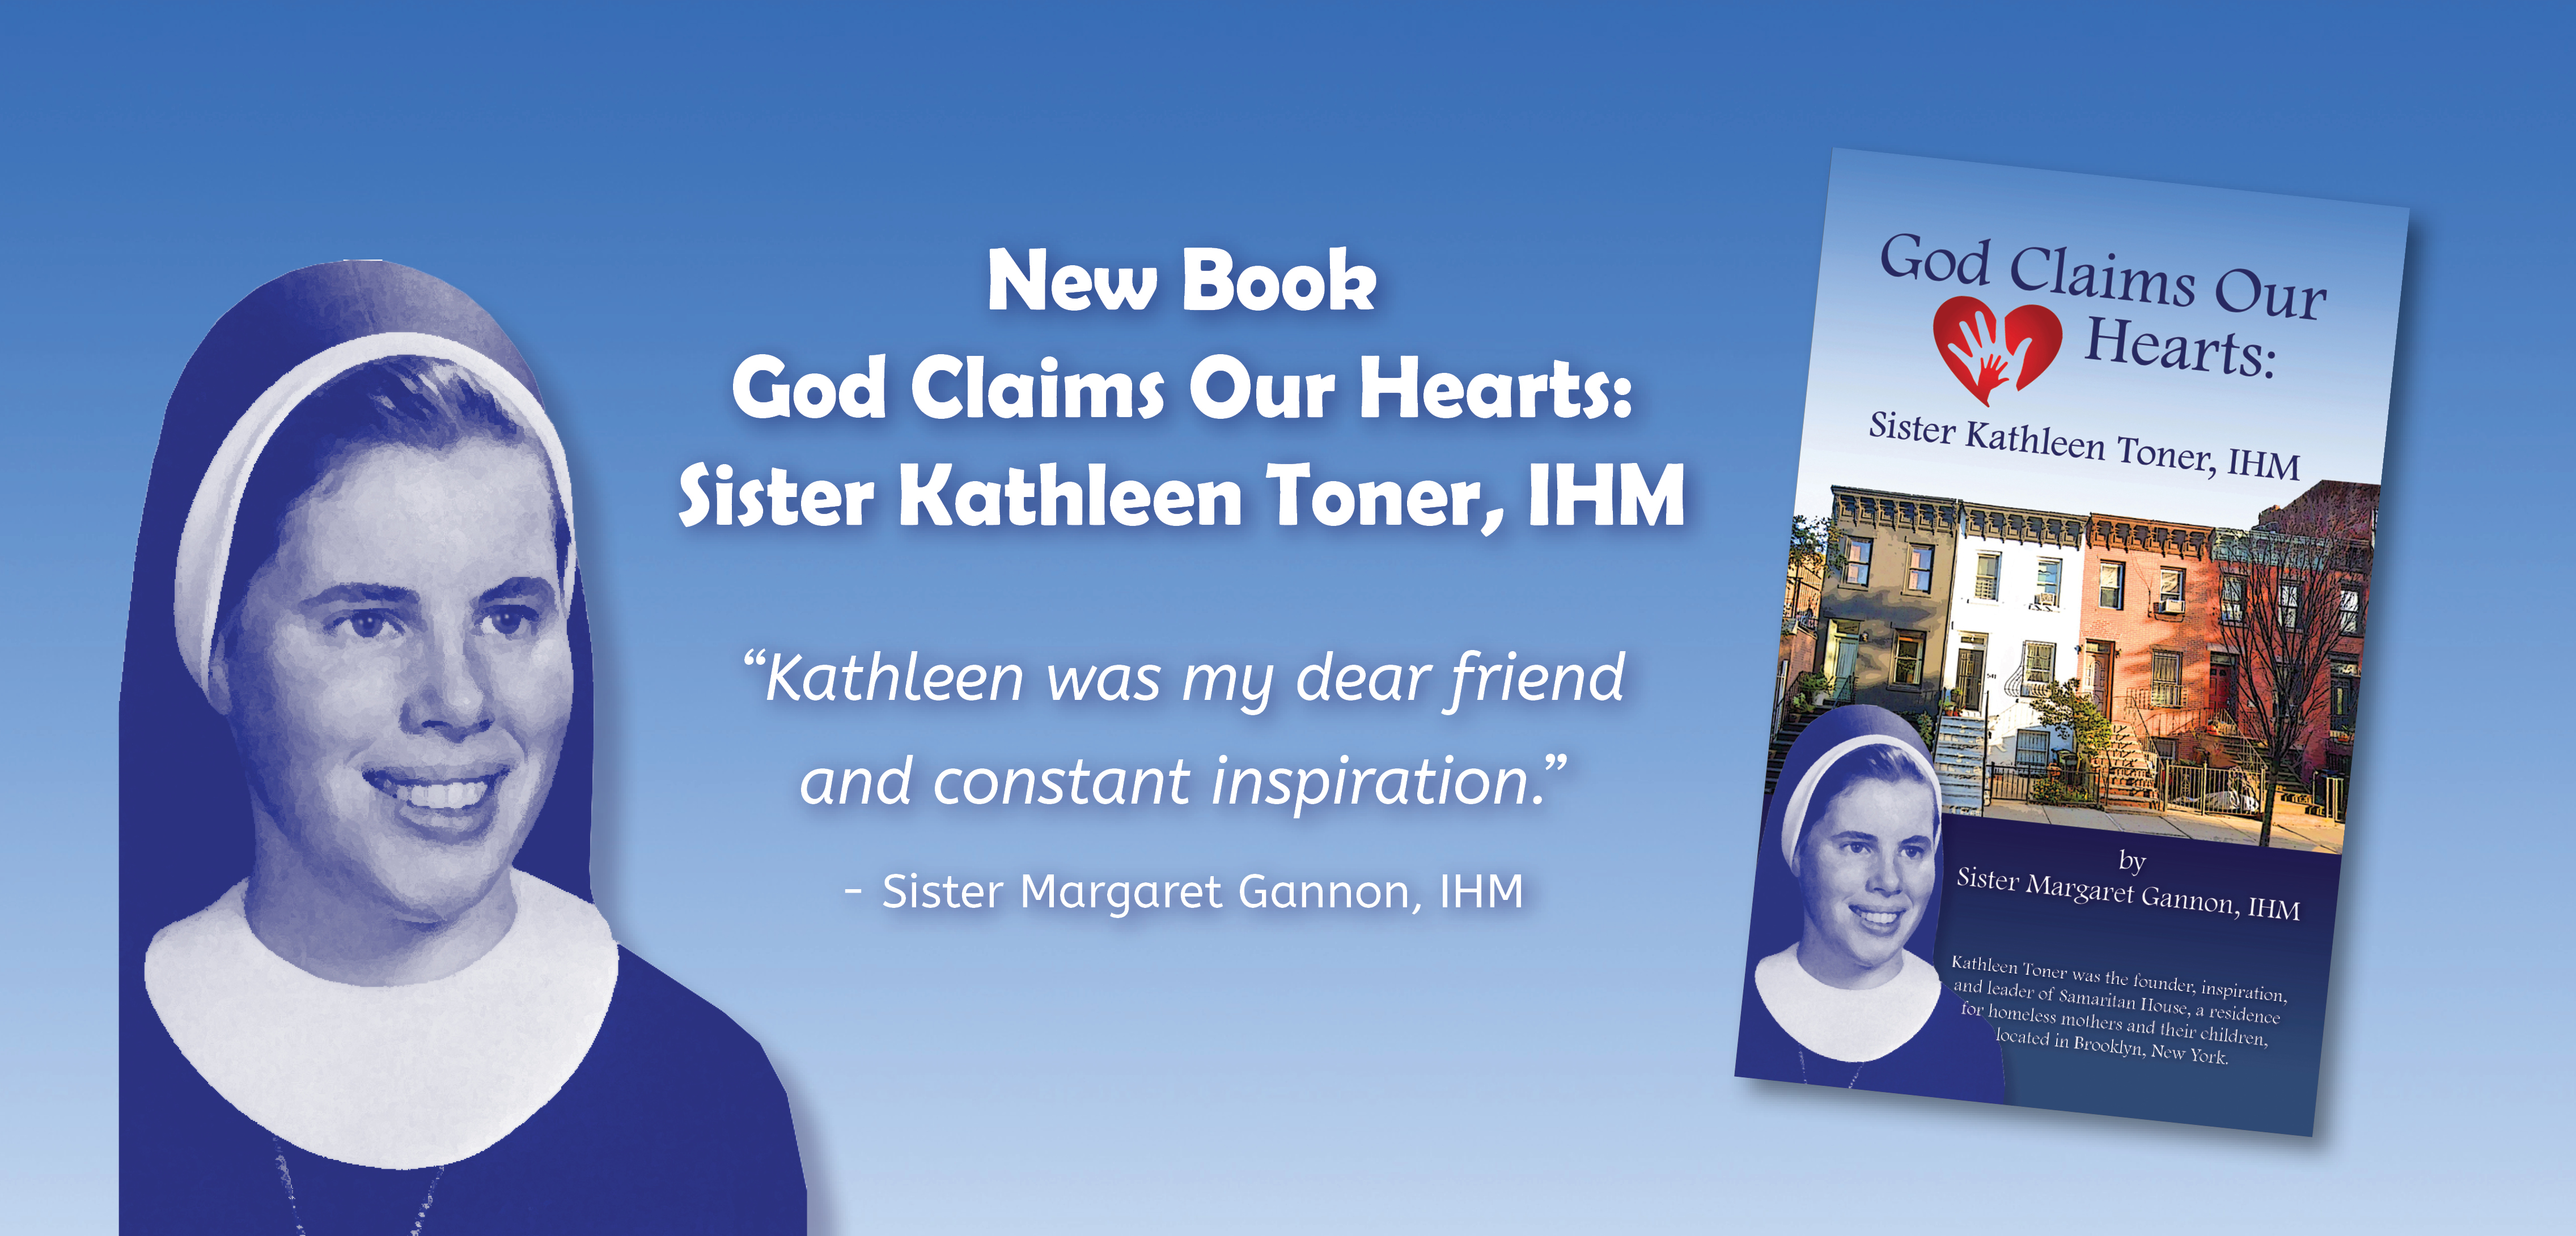 New Book about Sister Kathy Toner available on Amazon